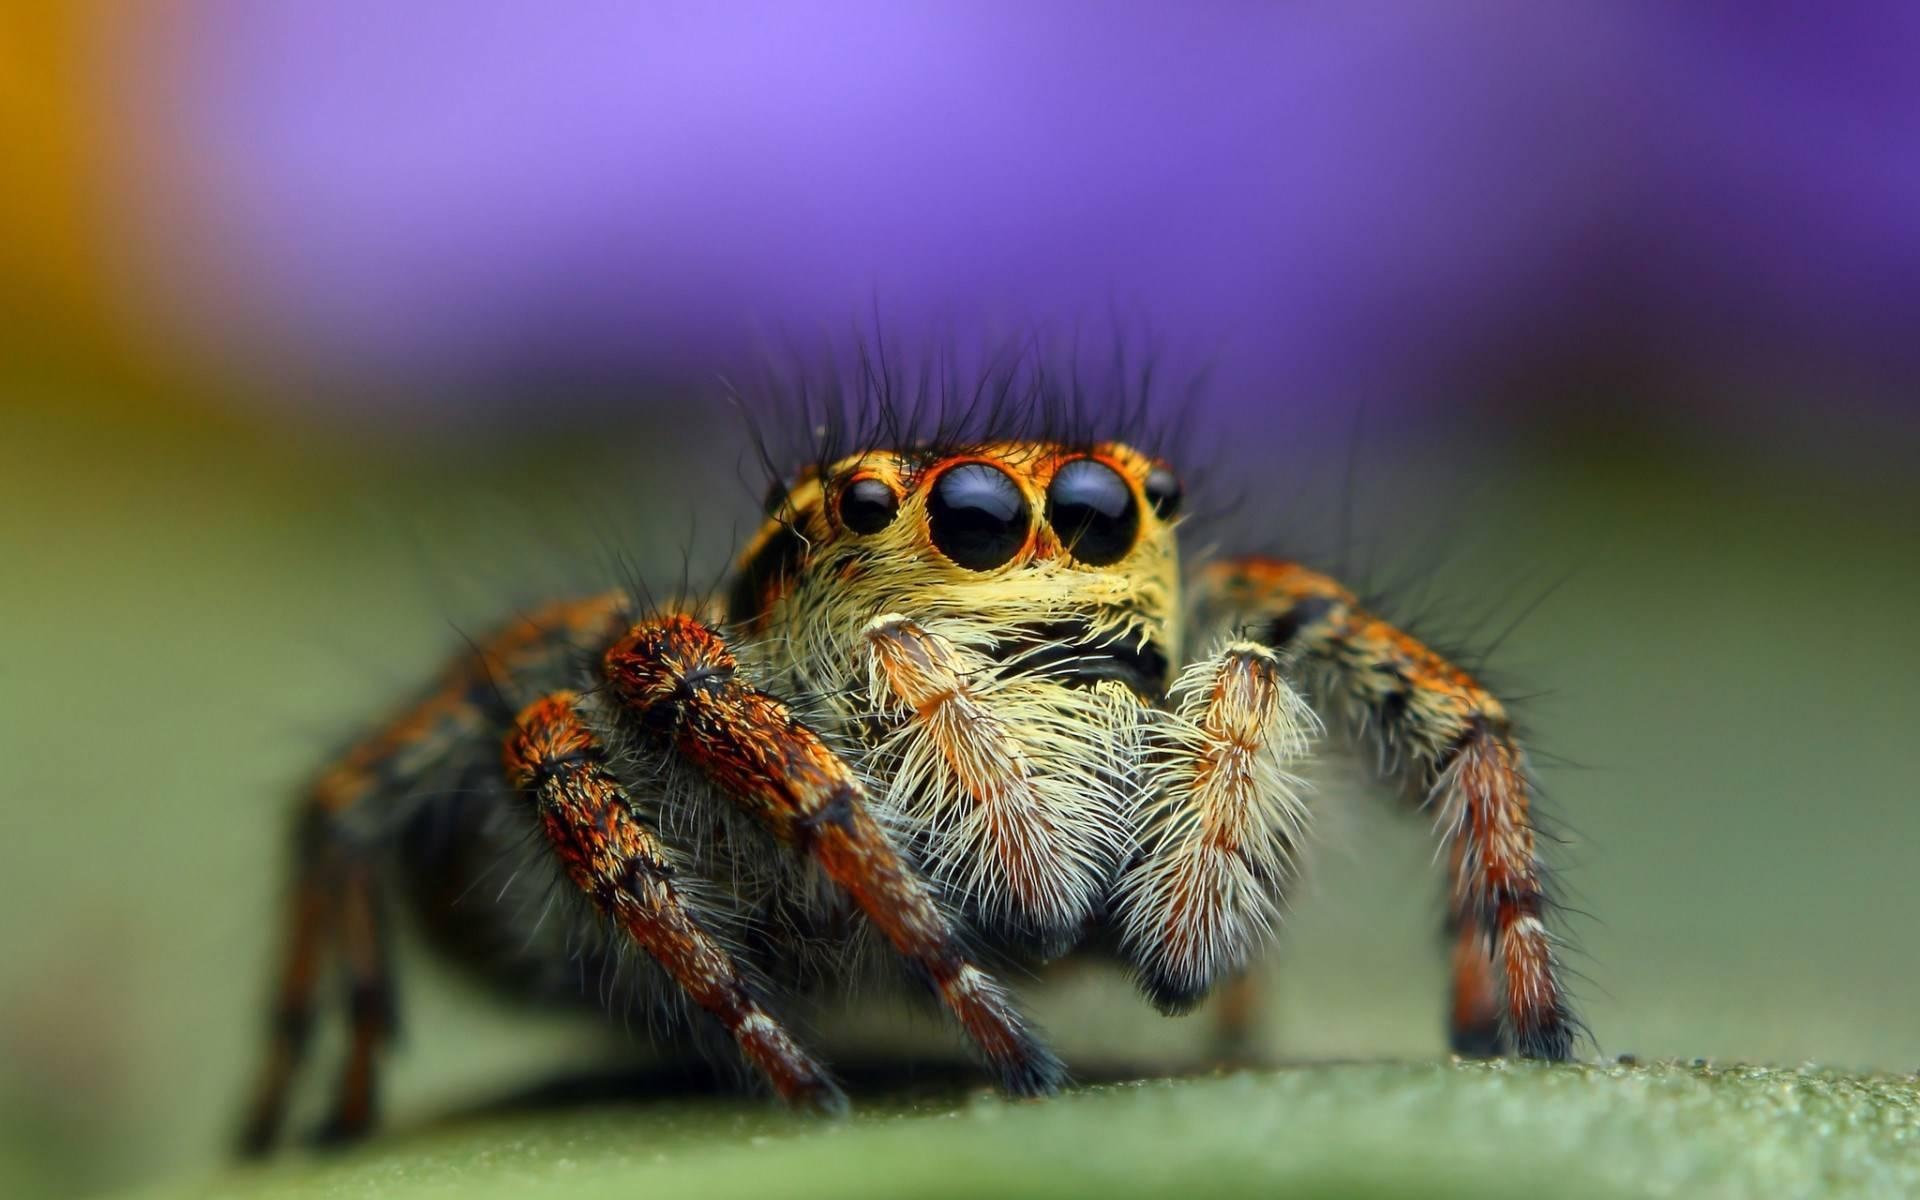 Spider insect, Intricate patterns, Wallpaper-worthy, Insect backgrounds, 1920x1200 HD Desktop